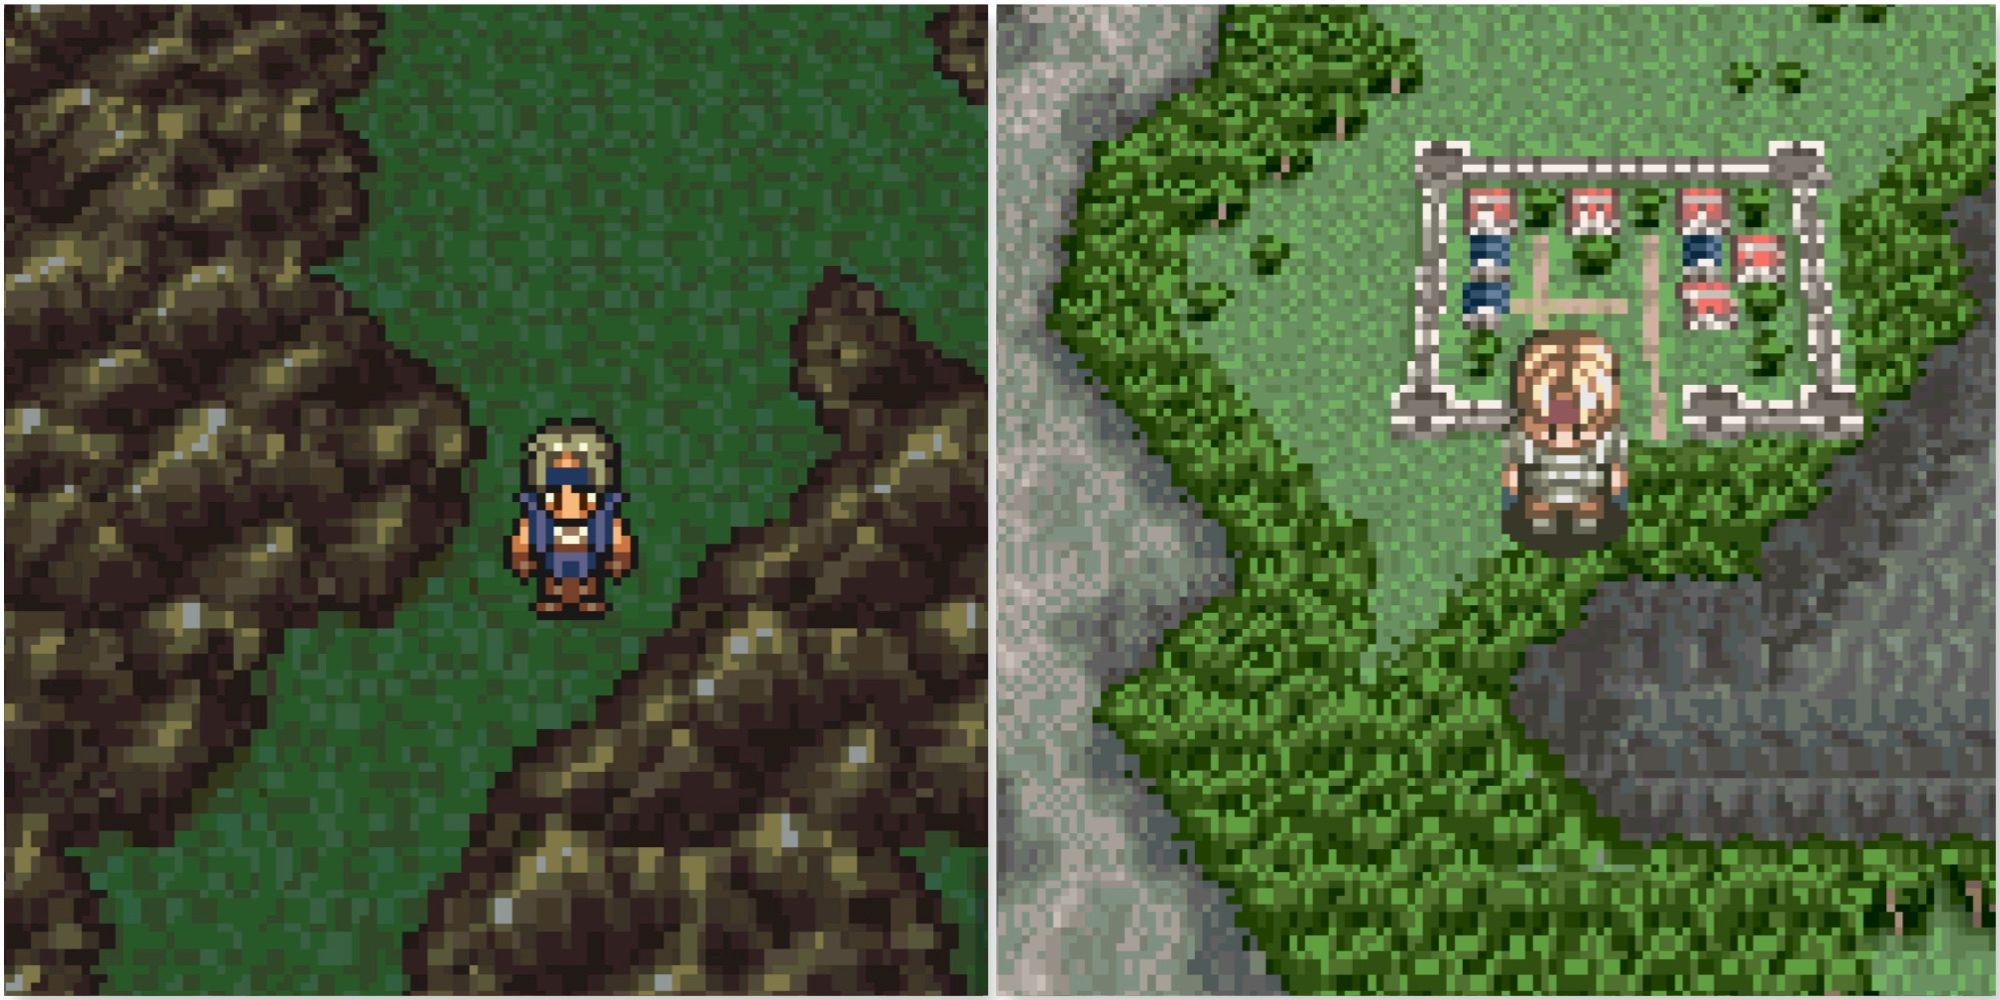 Exploring the worlds in Final Fantasy 6 and Tales Of Phantasia